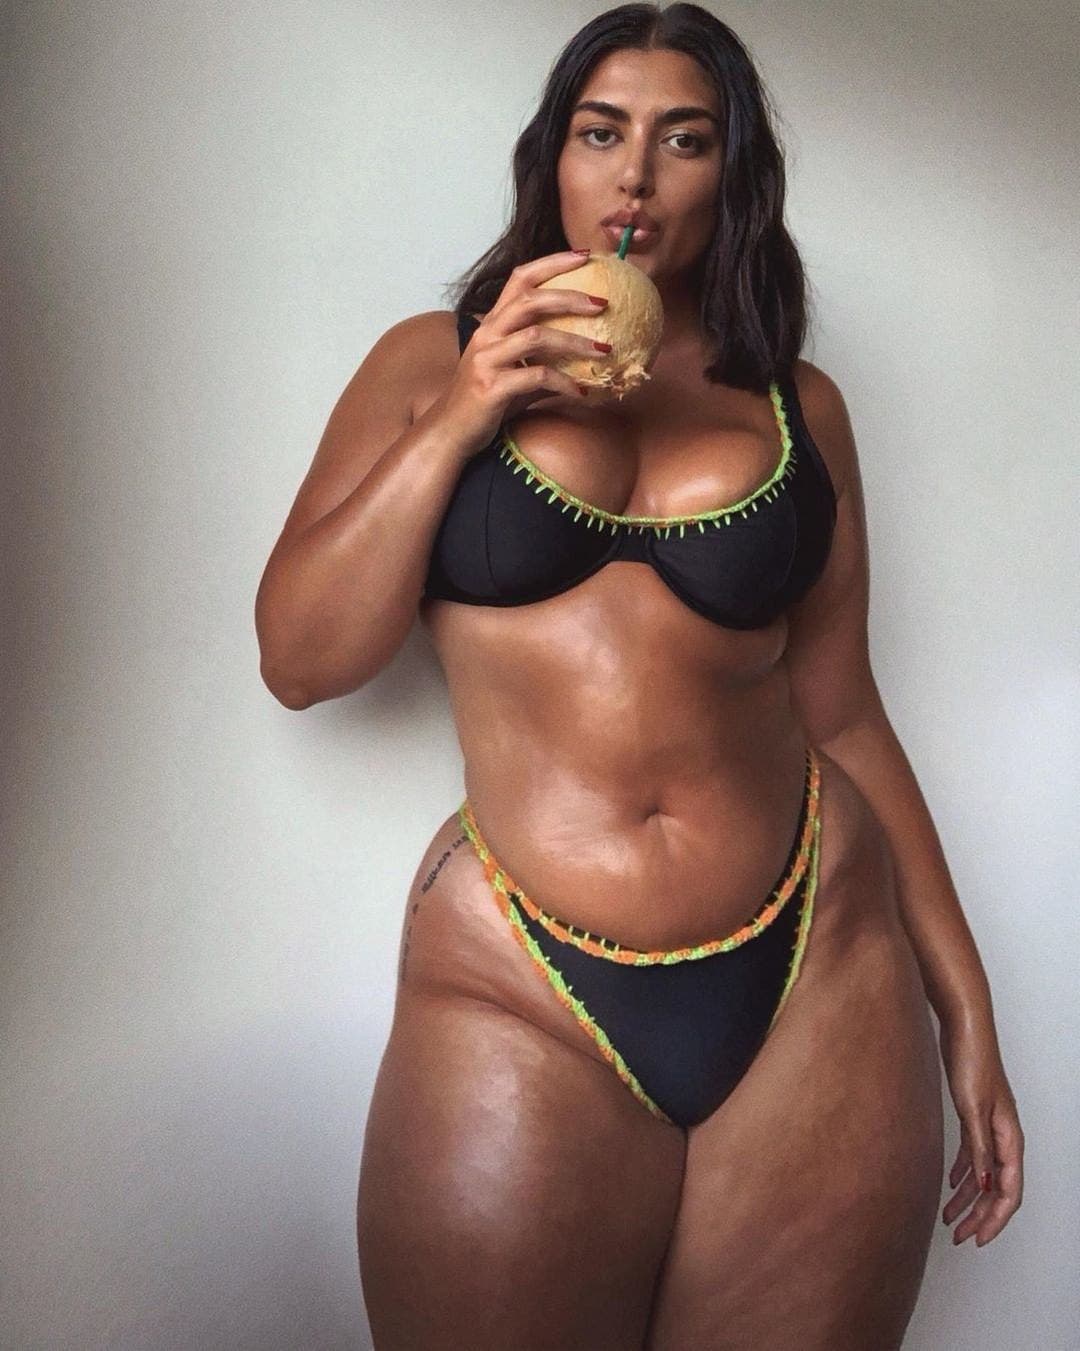 PrettyLittleThing model Irena Drezi was moved by the responses to her  bikini campaign: 'It's surreal